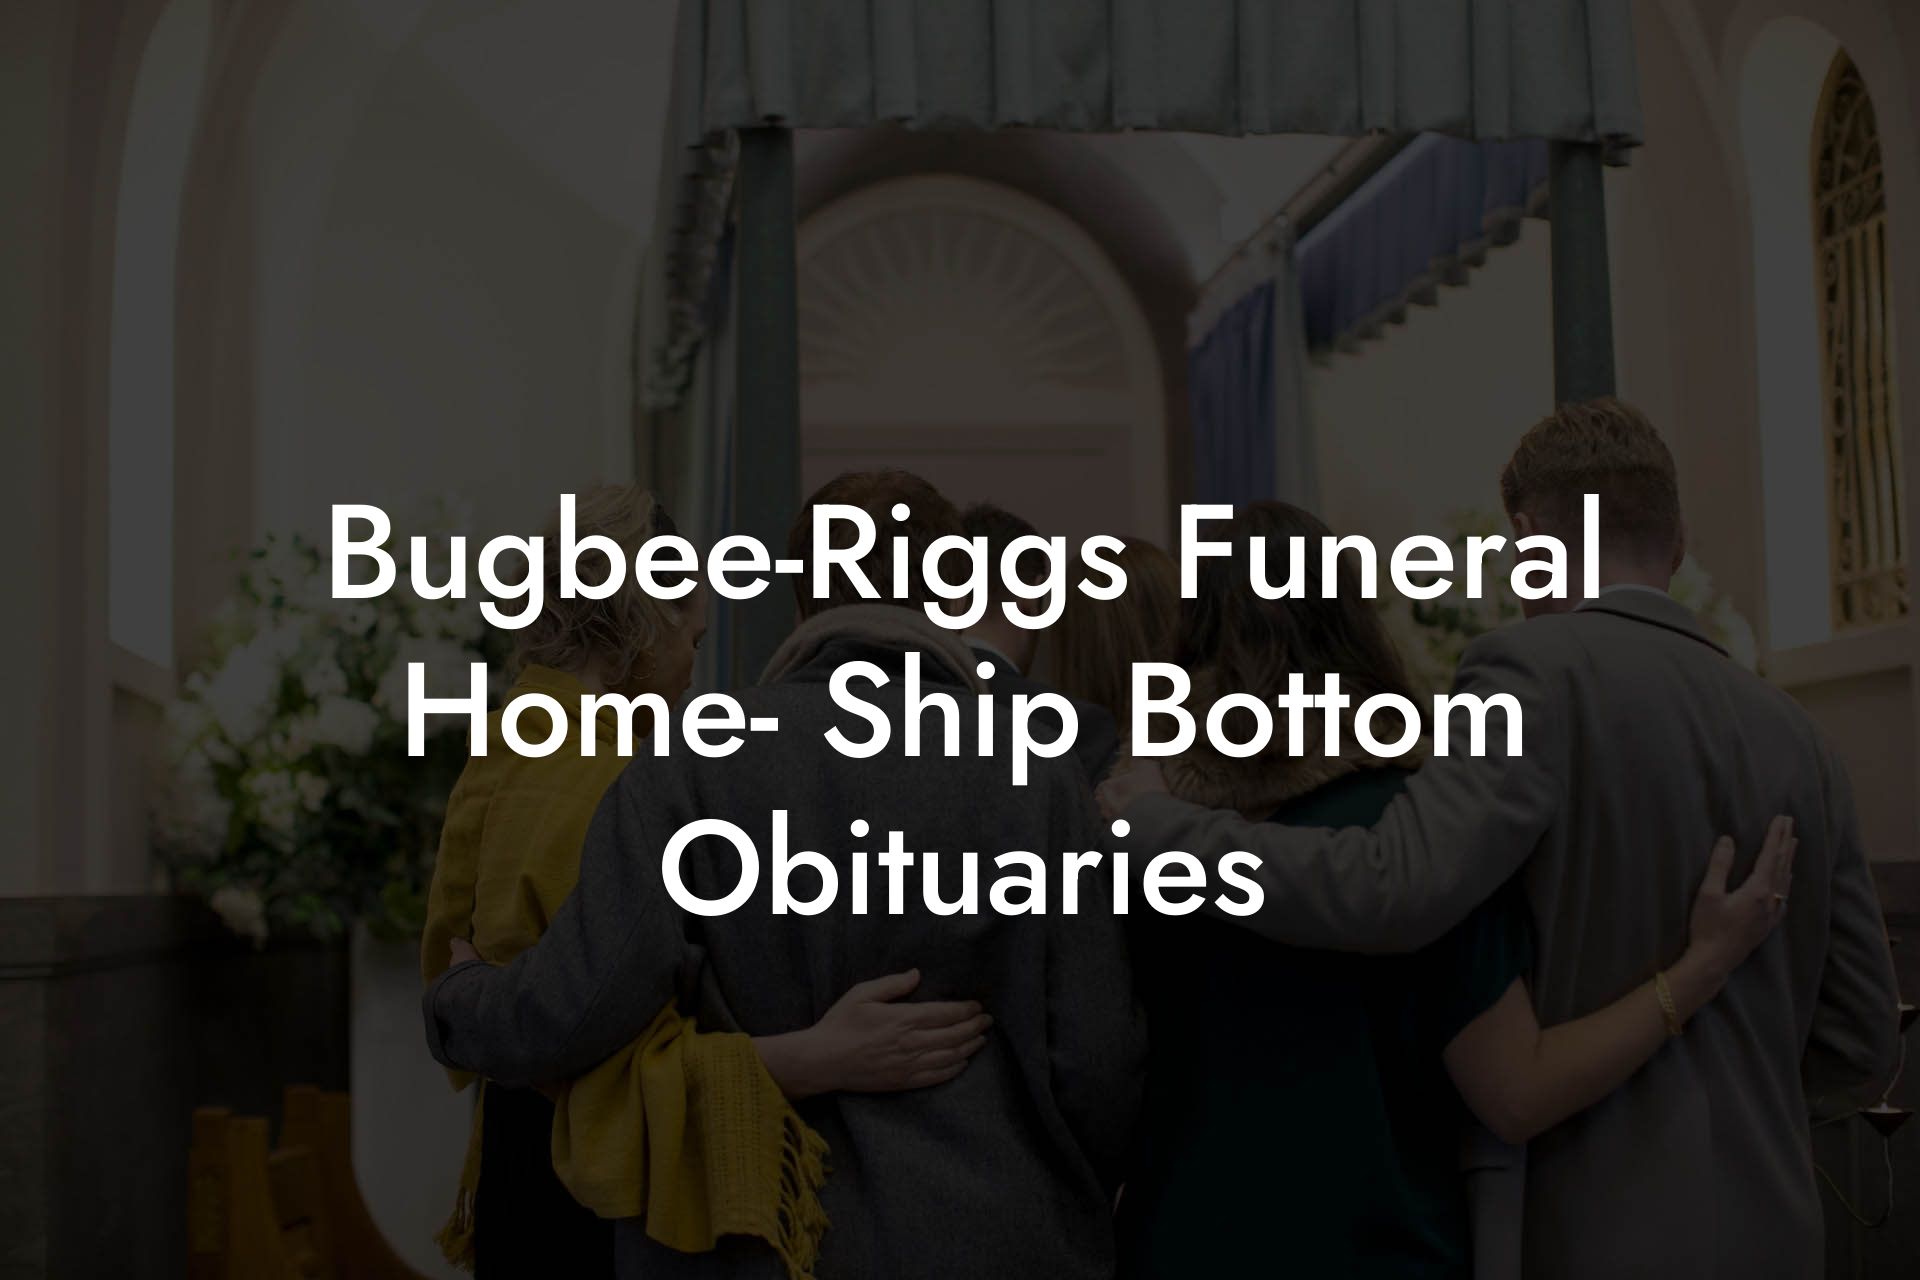 Bugbee-Riggs Funeral Home- Ship Bottom Obituaries